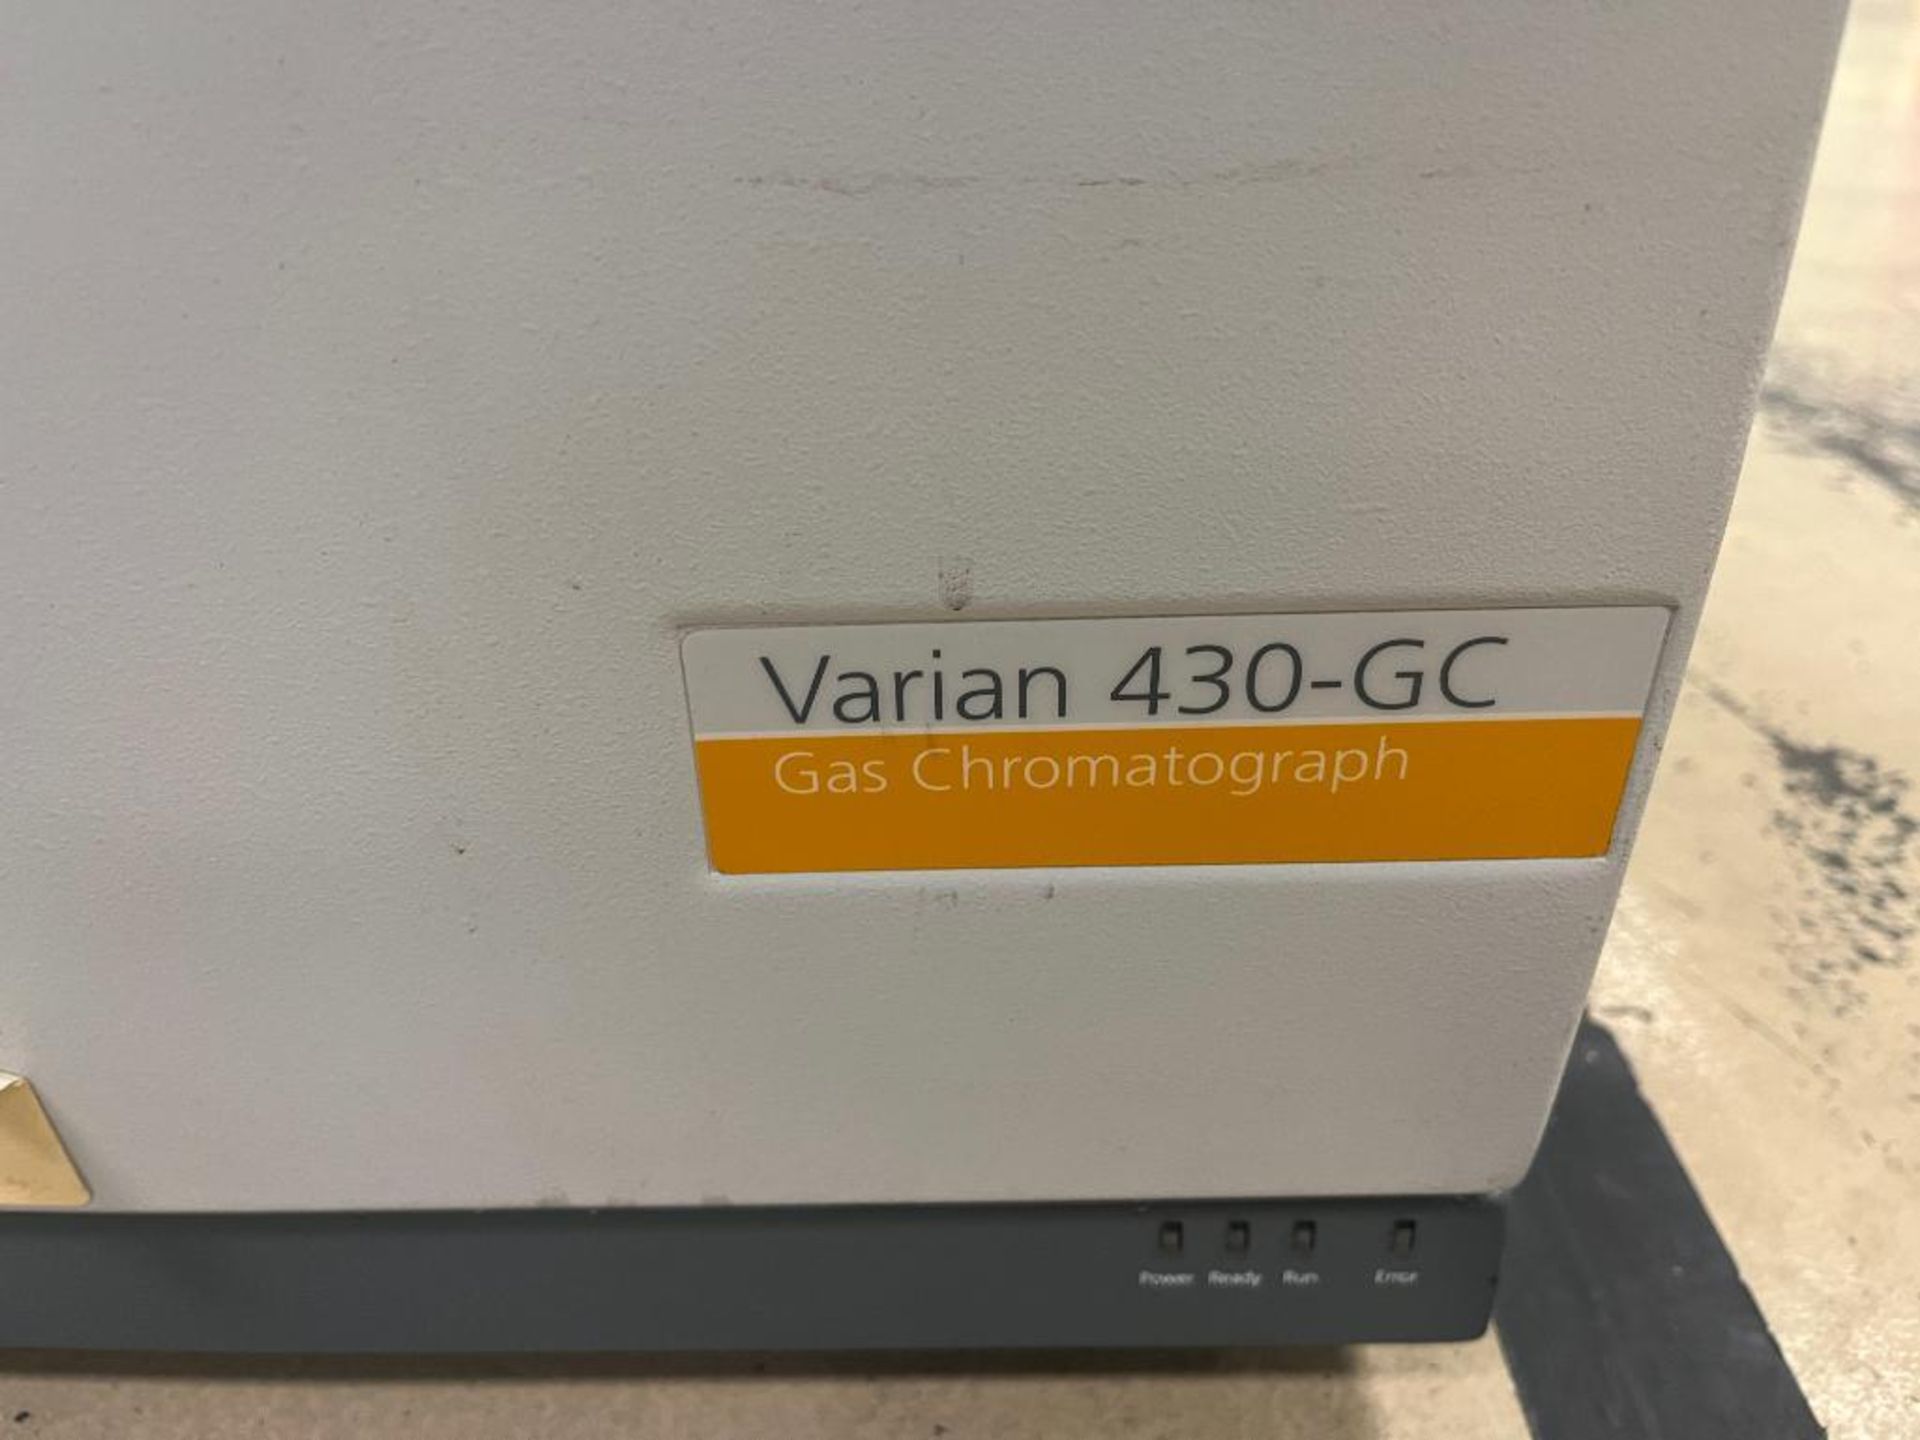 Varian 430-GC Gas Chromatograph, Serial Number GC0901B525 with Varian CP8400 Auto Sampler - Image 5 of 12